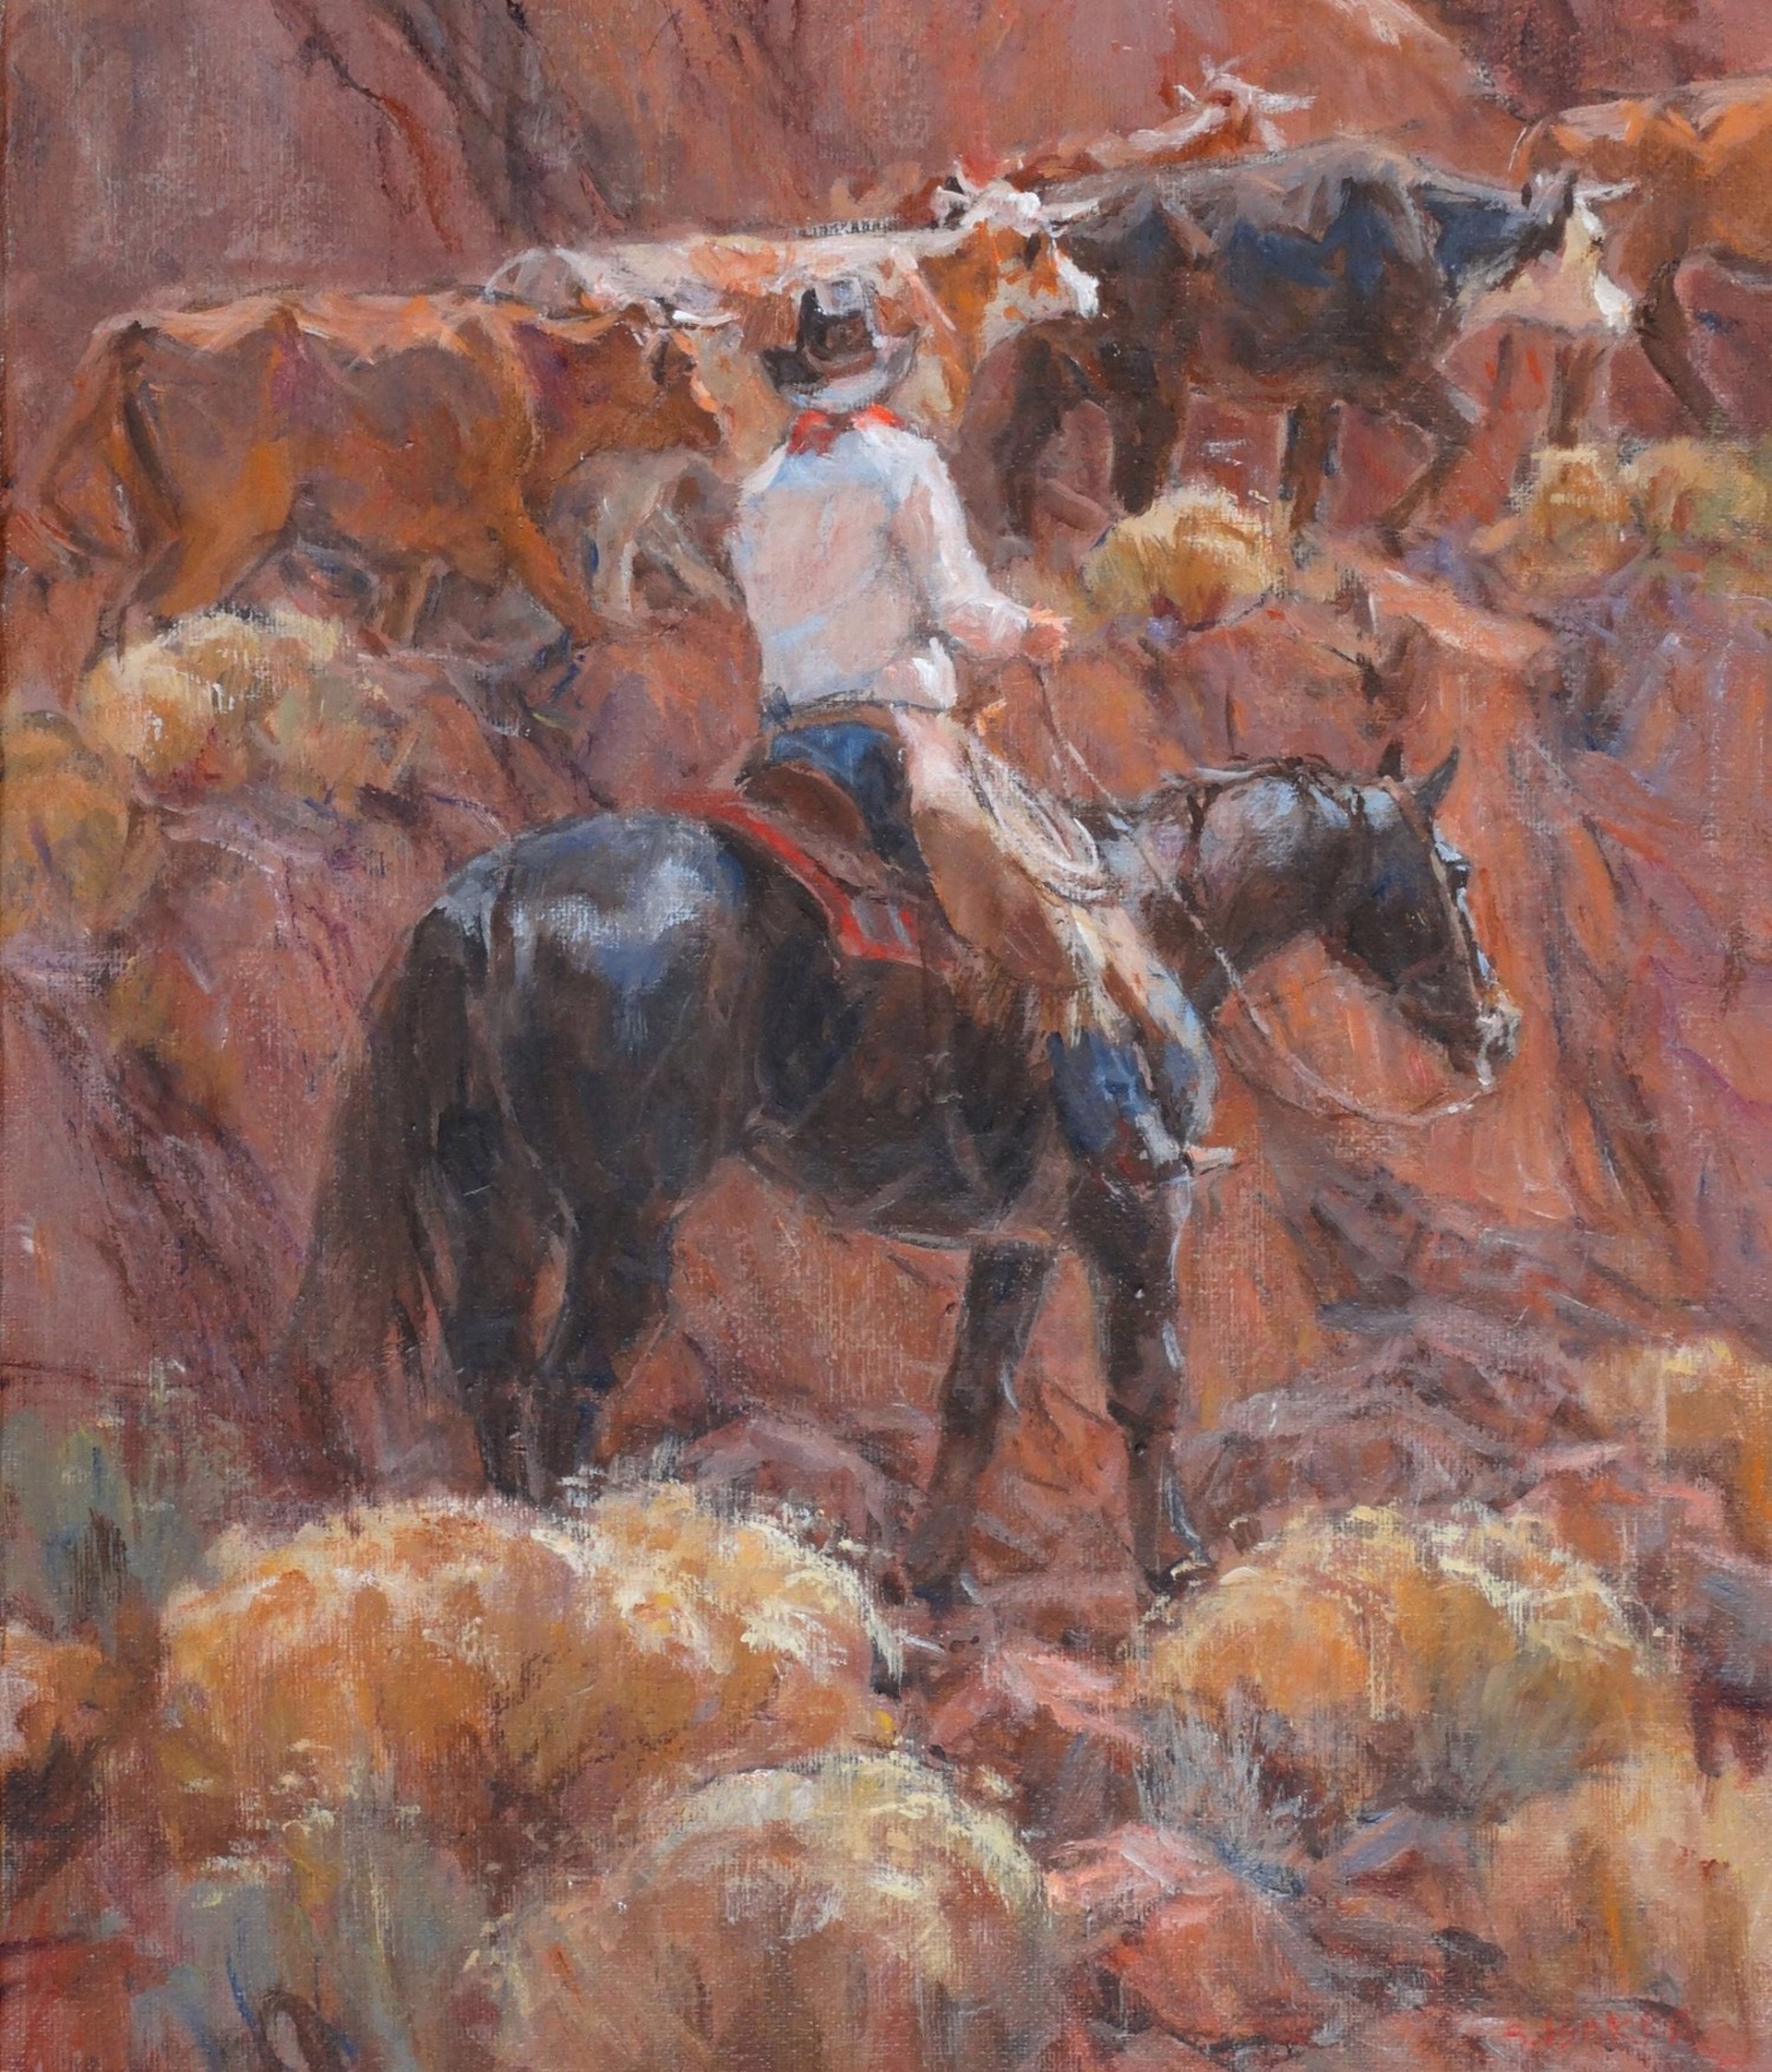 Gathering the Red Rocks by Suzanne Baker